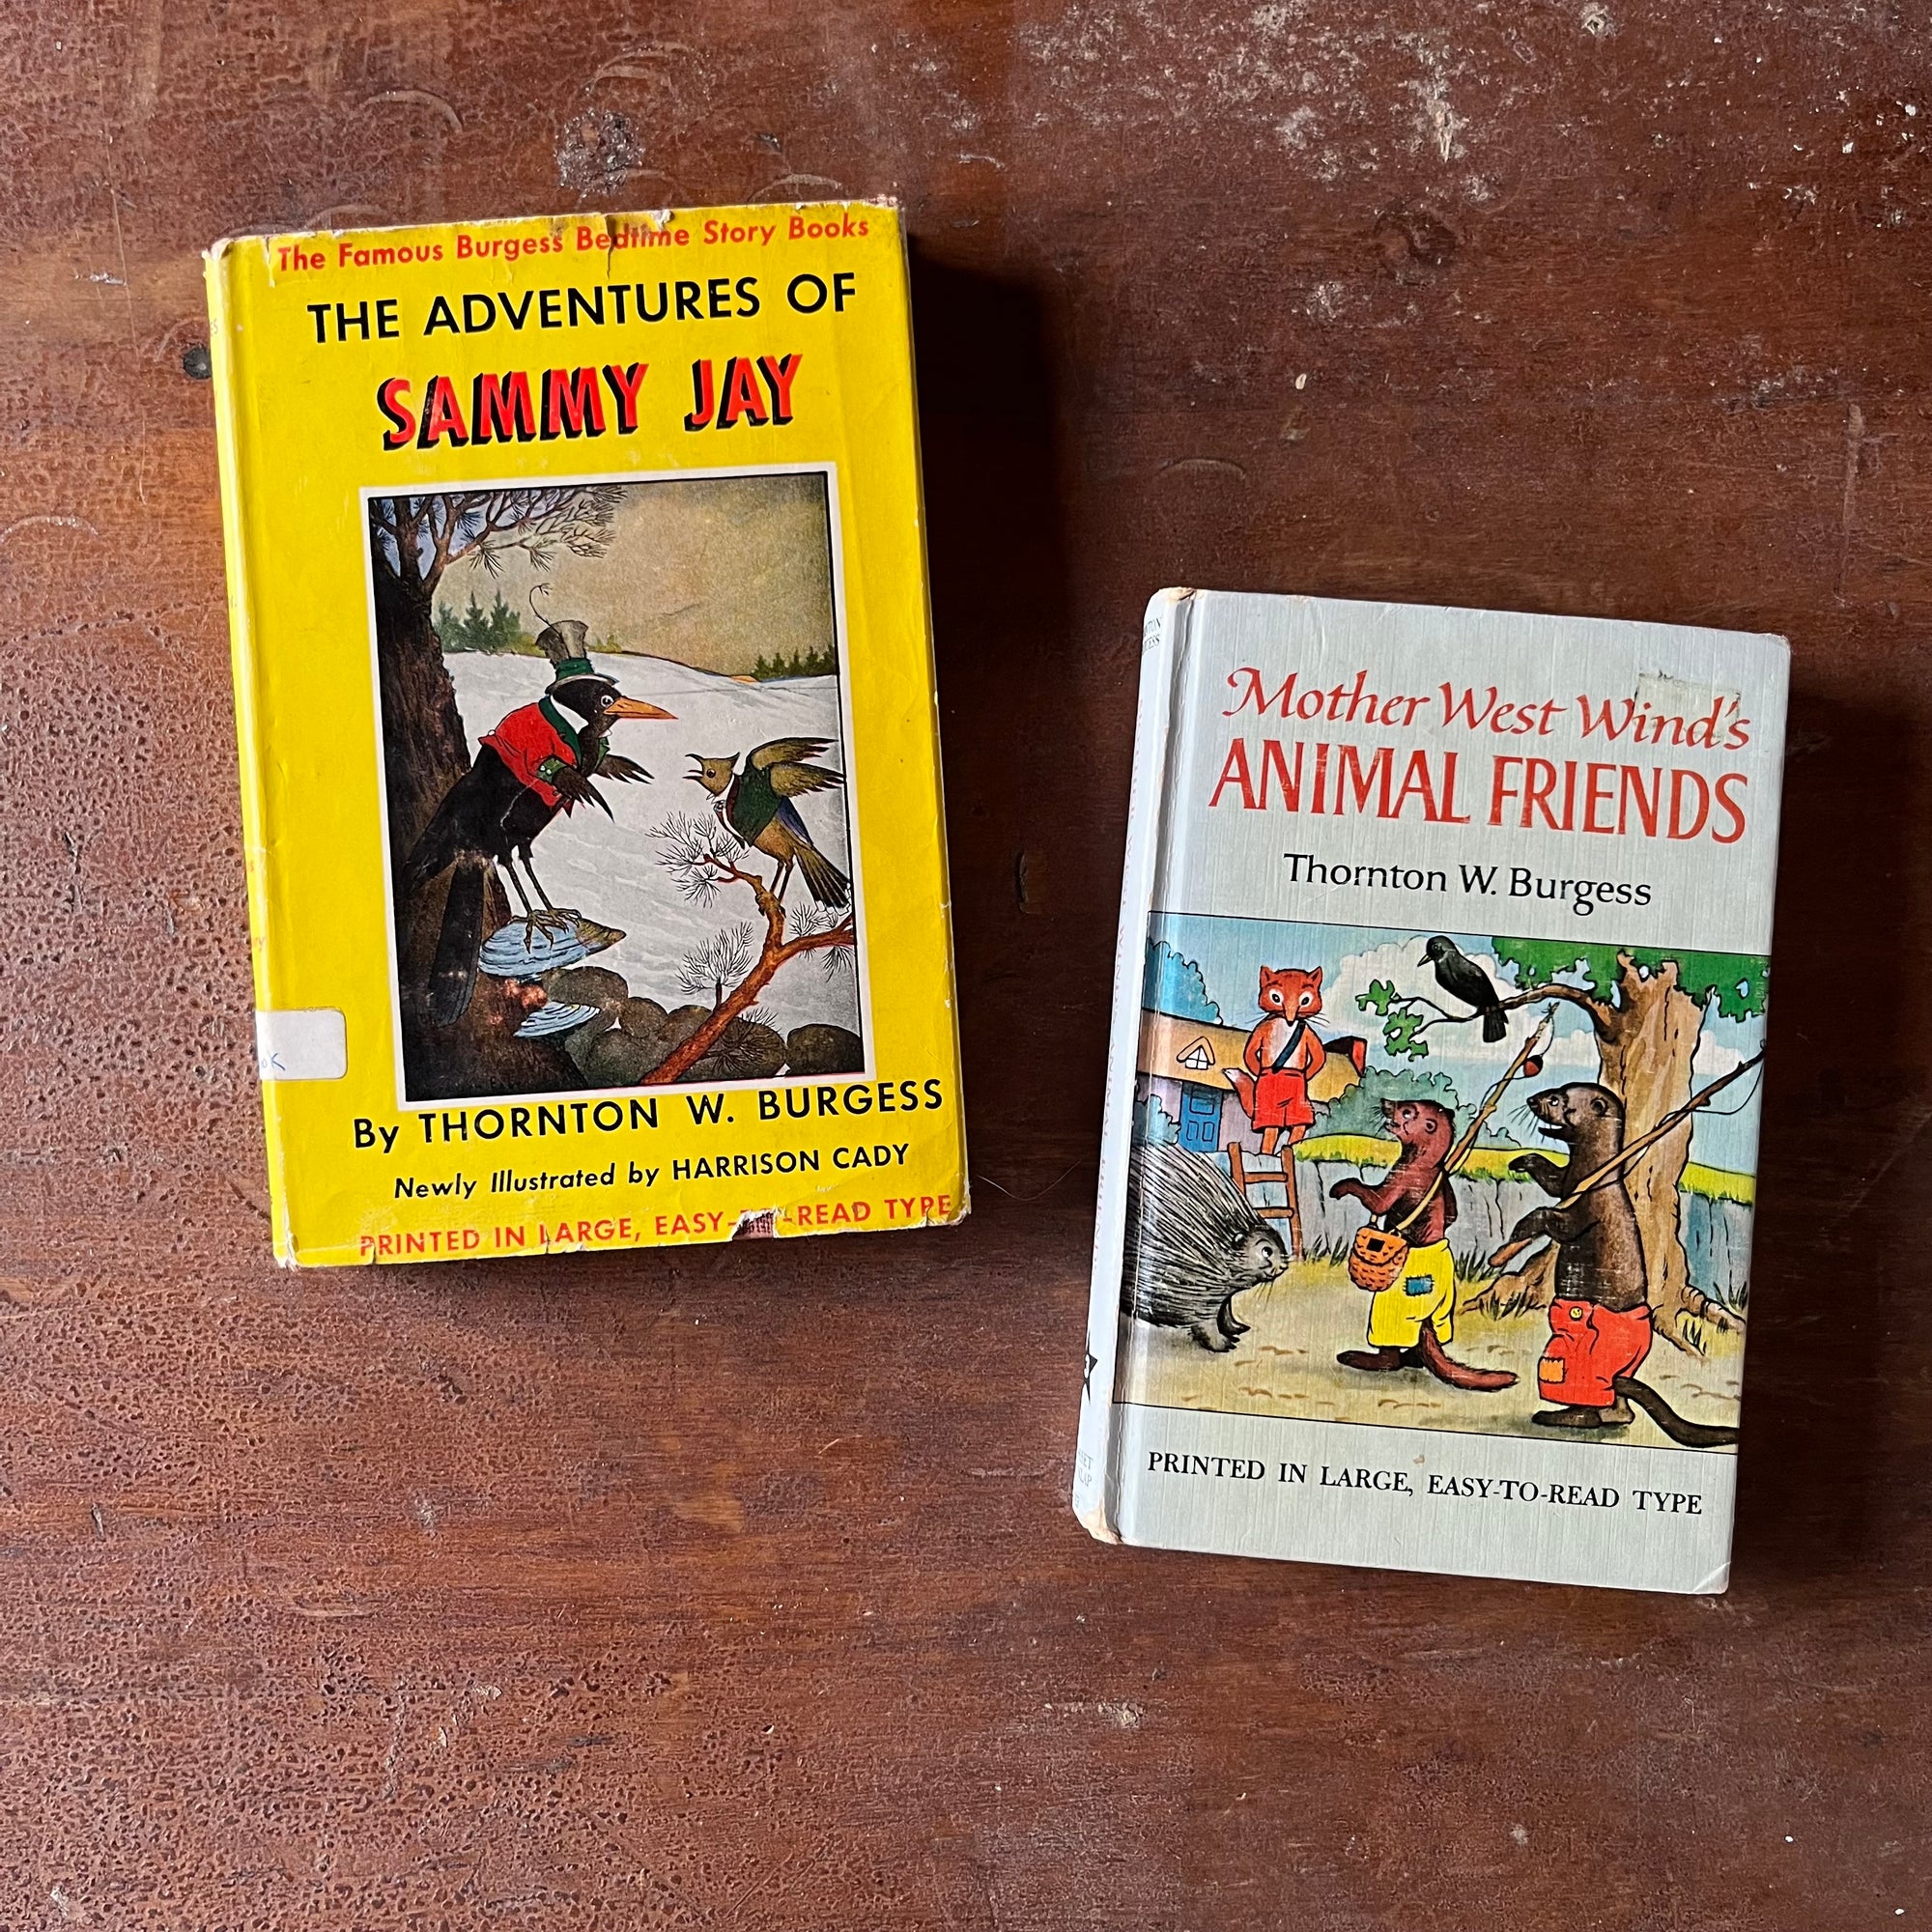 Pair of Thorton W. Burgess Books: The Adventures of Sammy Jay & Mother West Wind's Animal Friends - vintage children's storybooks  - view of the front covers with the dust jacket of The Adventures of Sammy Jay